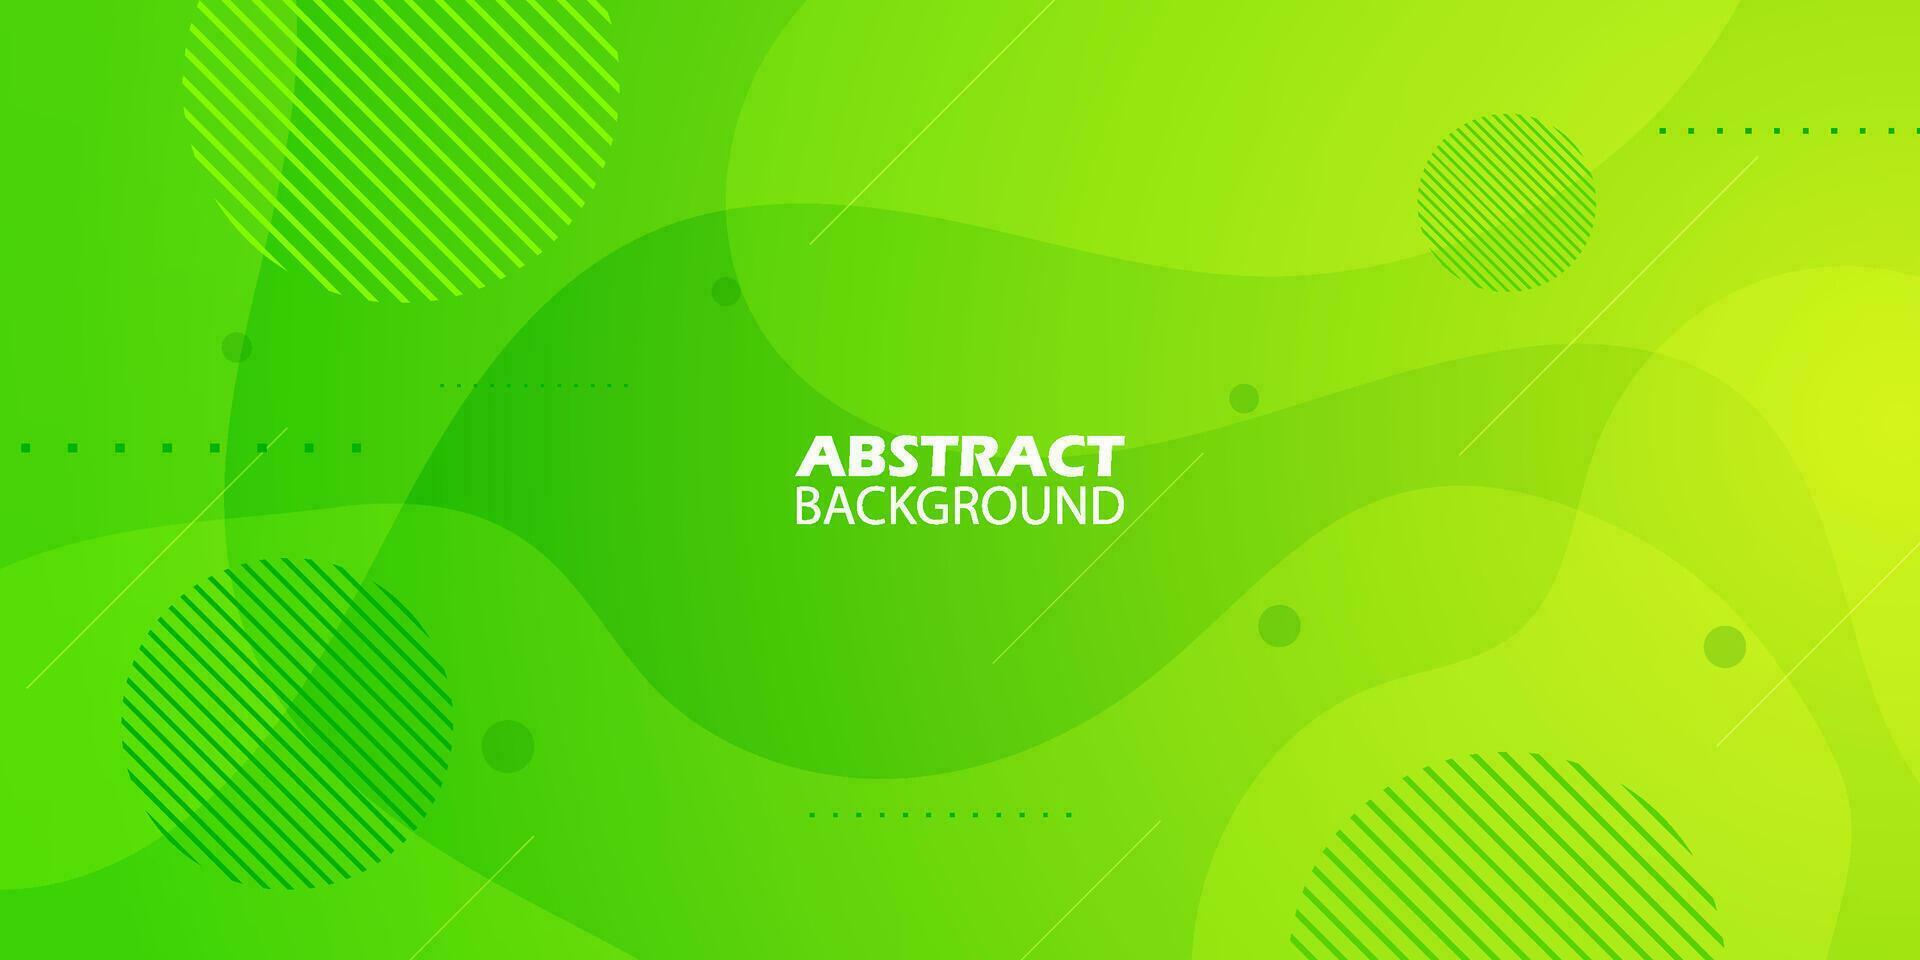 Minimal bright green abstract background with wavy shapes. Colorful green fluid design. Simple and modern concept. Eps10 vector